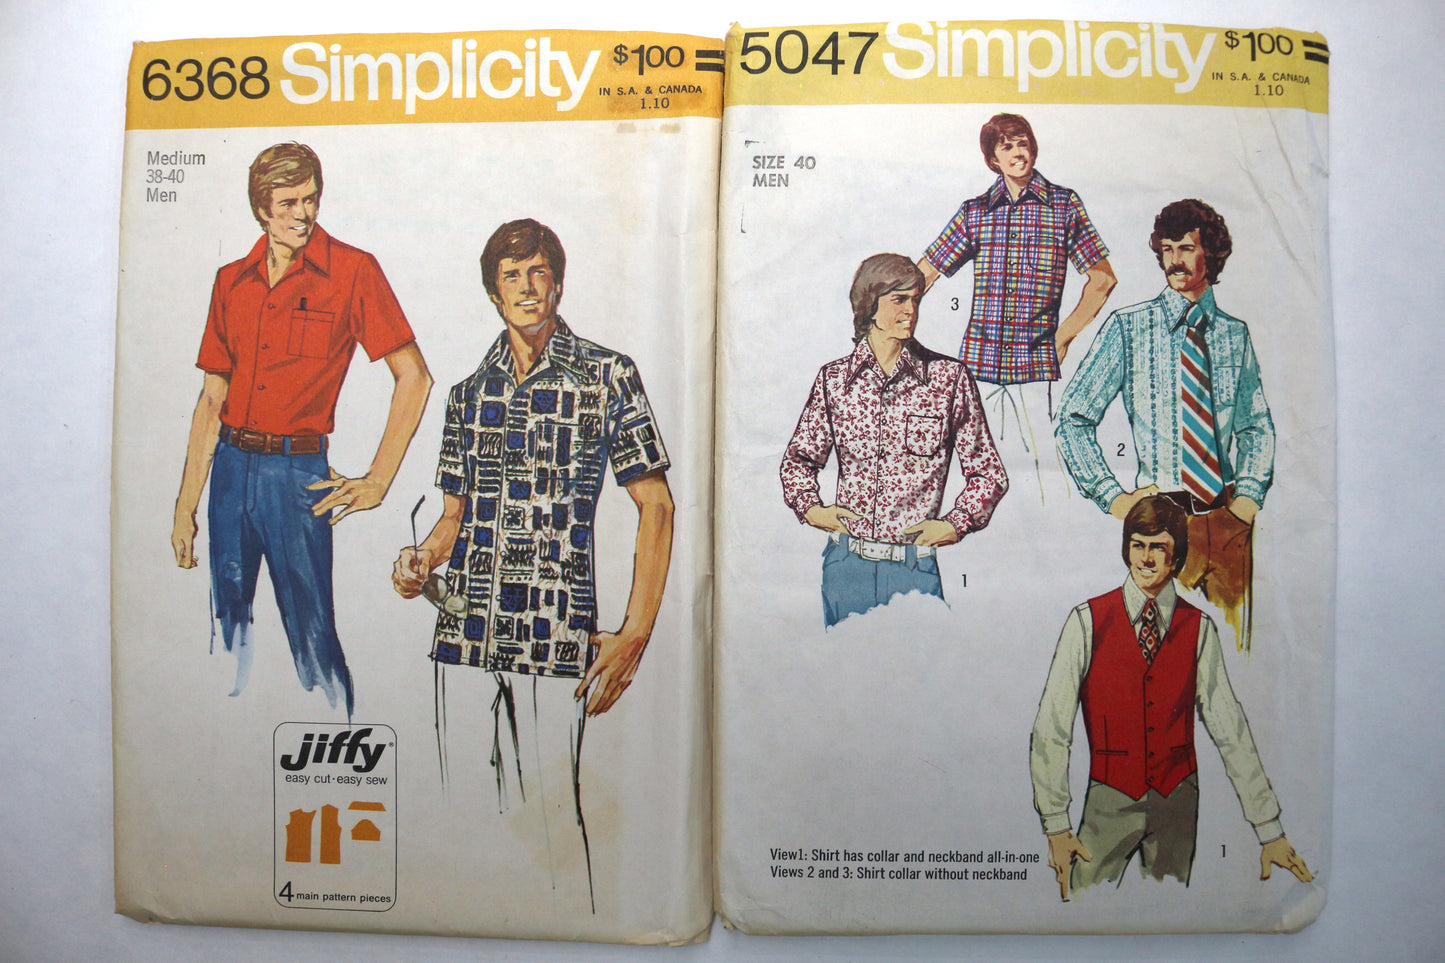 Simplicity 6368 Sewing Pattern or Simplicity 5047 Sewing Pattern